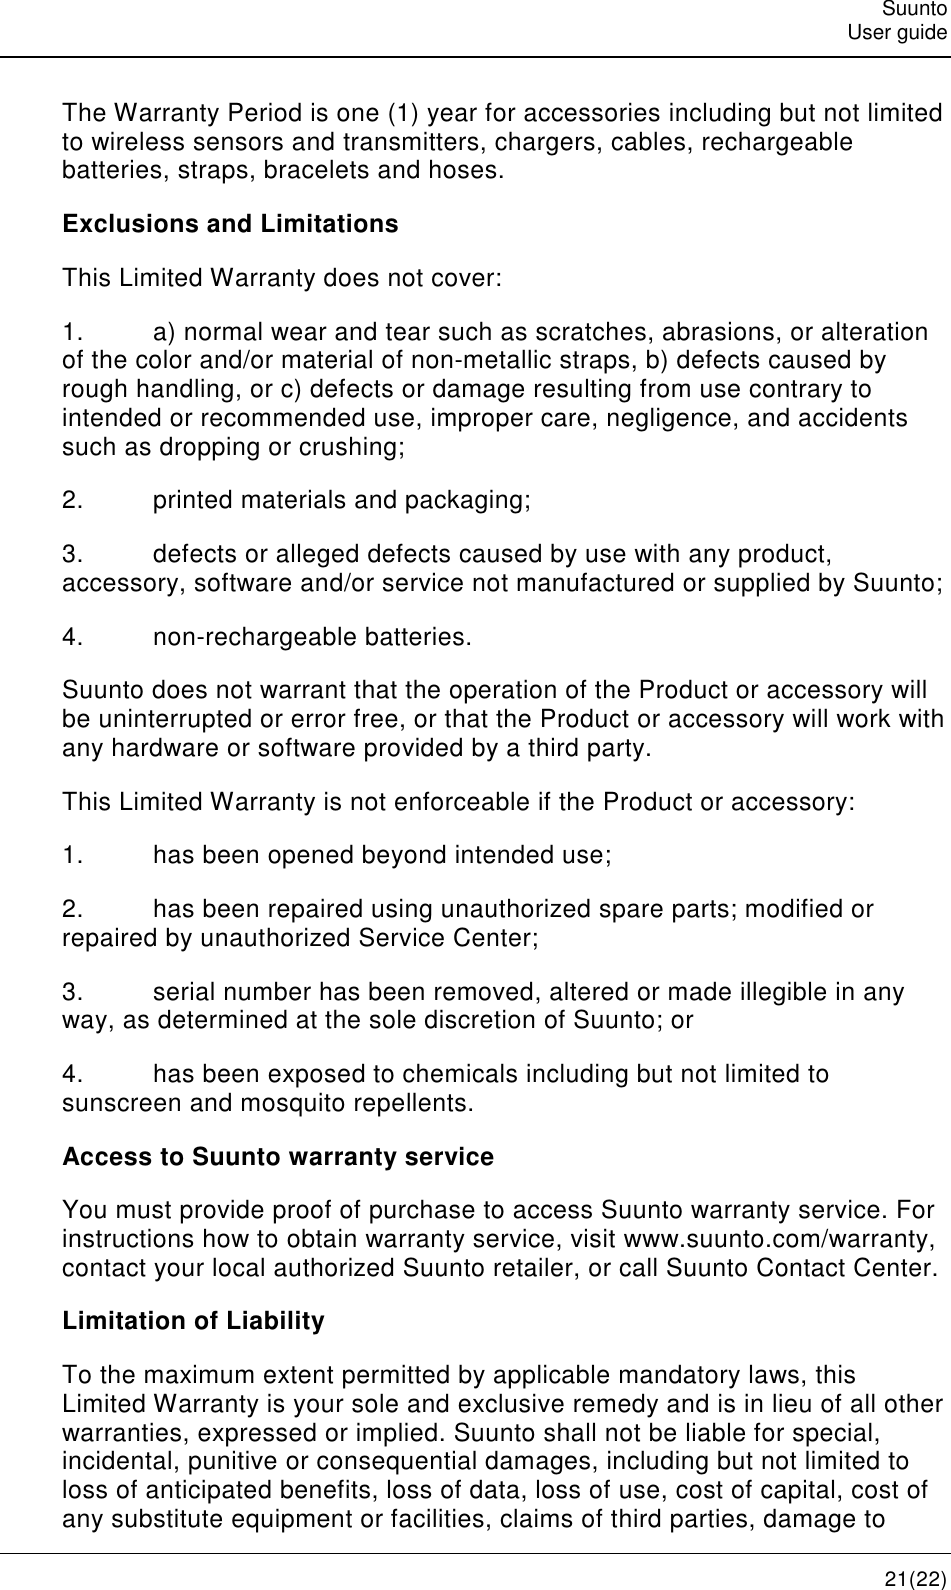   Suunto   User guide   21(22) The Warranty Period is one (1) year for accessories including but not limited to wireless sensors and transmitters, chargers, cables, rechargeable batteries, straps, bracelets and hoses. Exclusions and Limitations This Limited Warranty does not cover: 1.  a) normal wear and tear such as scratches, abrasions, or alteration of the color and/or material of non-metallic straps, b) defects caused by rough handling, or c) defects or damage resulting from use contrary to intended or recommended use, improper care, negligence, and accidents such as dropping or crushing; 2.  printed materials and packaging; 3.  defects or alleged defects caused by use with any product, accessory, software and/or service not manufactured or supplied by Suunto; 4.  non-rechargeable batteries. Suunto does not warrant that the operation of the Product or accessory will be uninterrupted or error free, or that the Product or accessory will work with any hardware or software provided by a third party. This Limited Warranty is not enforceable if the Product or accessory: 1.  has been opened beyond intended use; 2.  has been repaired using unauthorized spare parts; modified or repaired by unauthorized Service Center; 3.  serial number has been removed, altered or made illegible in any way, as determined at the sole discretion of Suunto; or 4.  has been exposed to chemicals including but not limited to sunscreen and mosquito repellents. Access to Suunto warranty service You must provide proof of purchase to access Suunto warranty service. For instructions how to obtain warranty service, visit www.suunto.com/warranty, contact your local authorized Suunto retailer, or call Suunto Contact Center. Limitation of Liability To the maximum extent permitted by applicable mandatory laws, this Limited Warranty is your sole and exclusive remedy and is in lieu of all other warranties, expressed or implied. Suunto shall not be liable for special, incidental, punitive or consequential damages, including but not limited to loss of anticipated benefits, loss of data, loss of use, cost of capital, cost of any substitute equipment or facilities, claims of third parties, damage to 